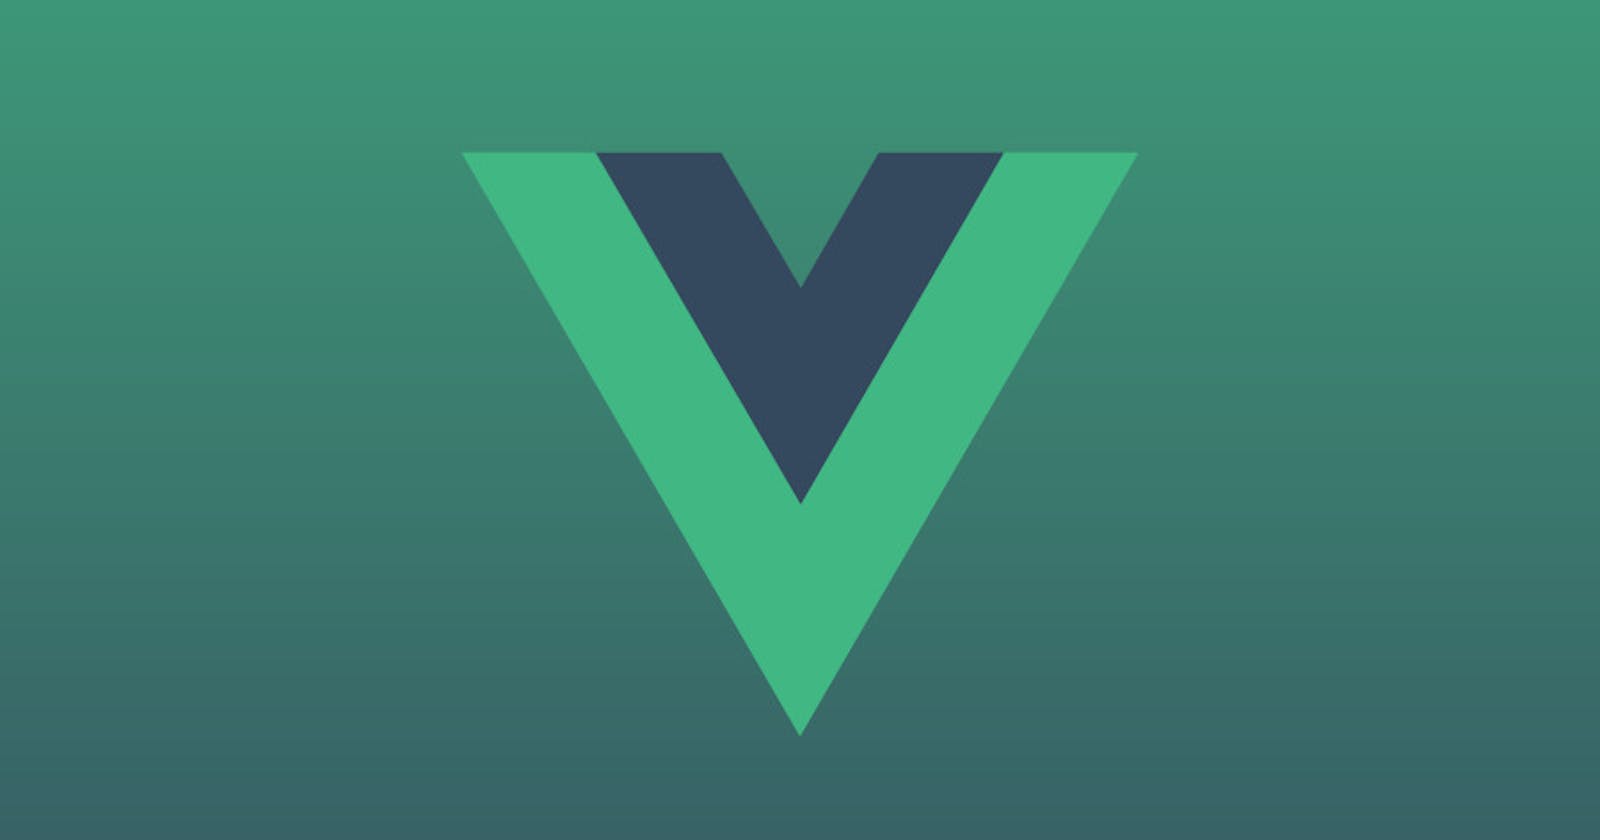 3 Ways to Prepopulate Your Vue.js Global Store’s State